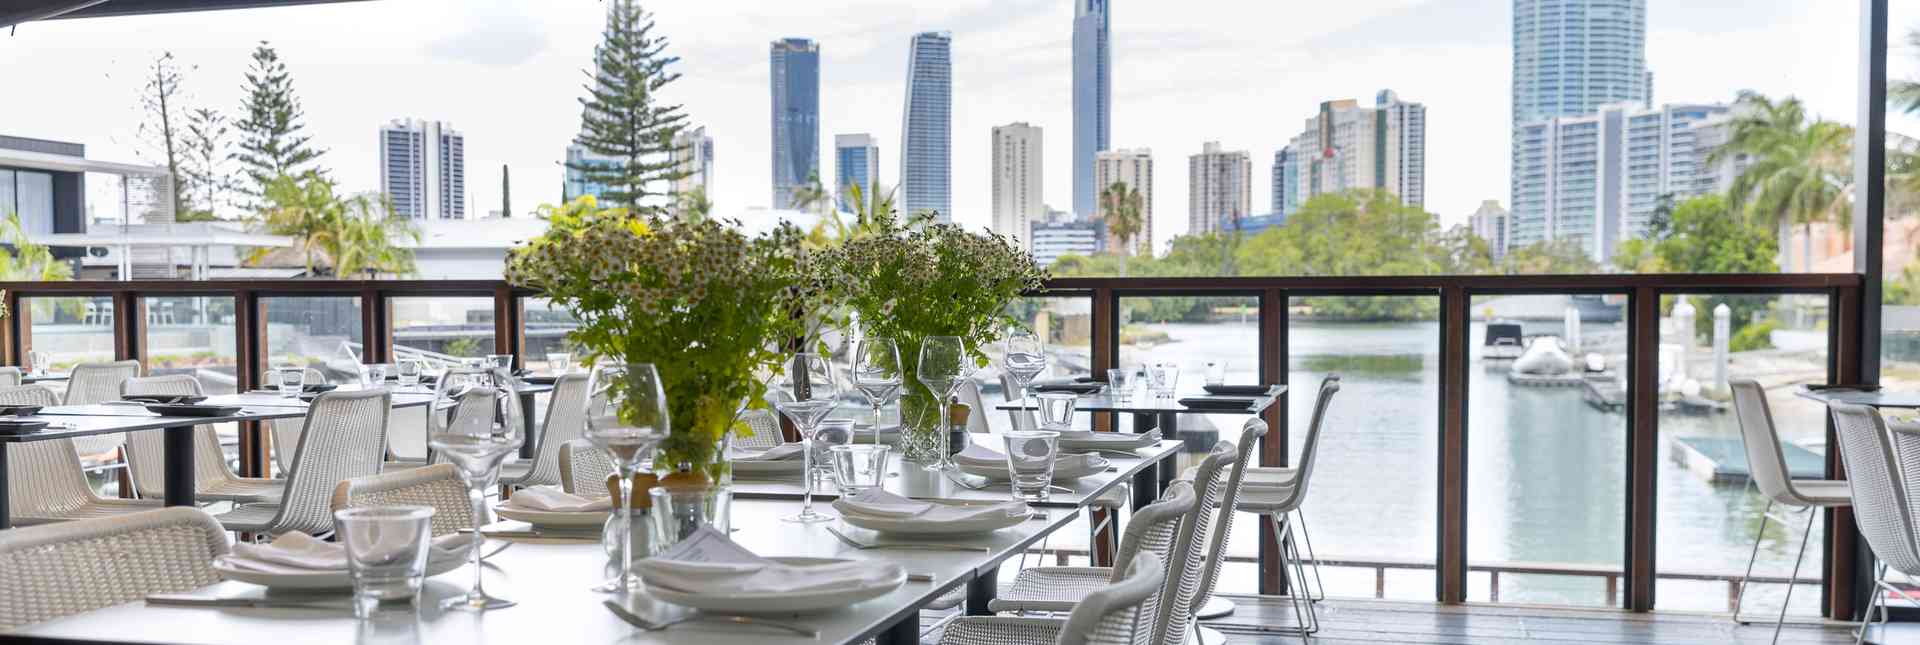 Creekside Dining on the Gold Coast